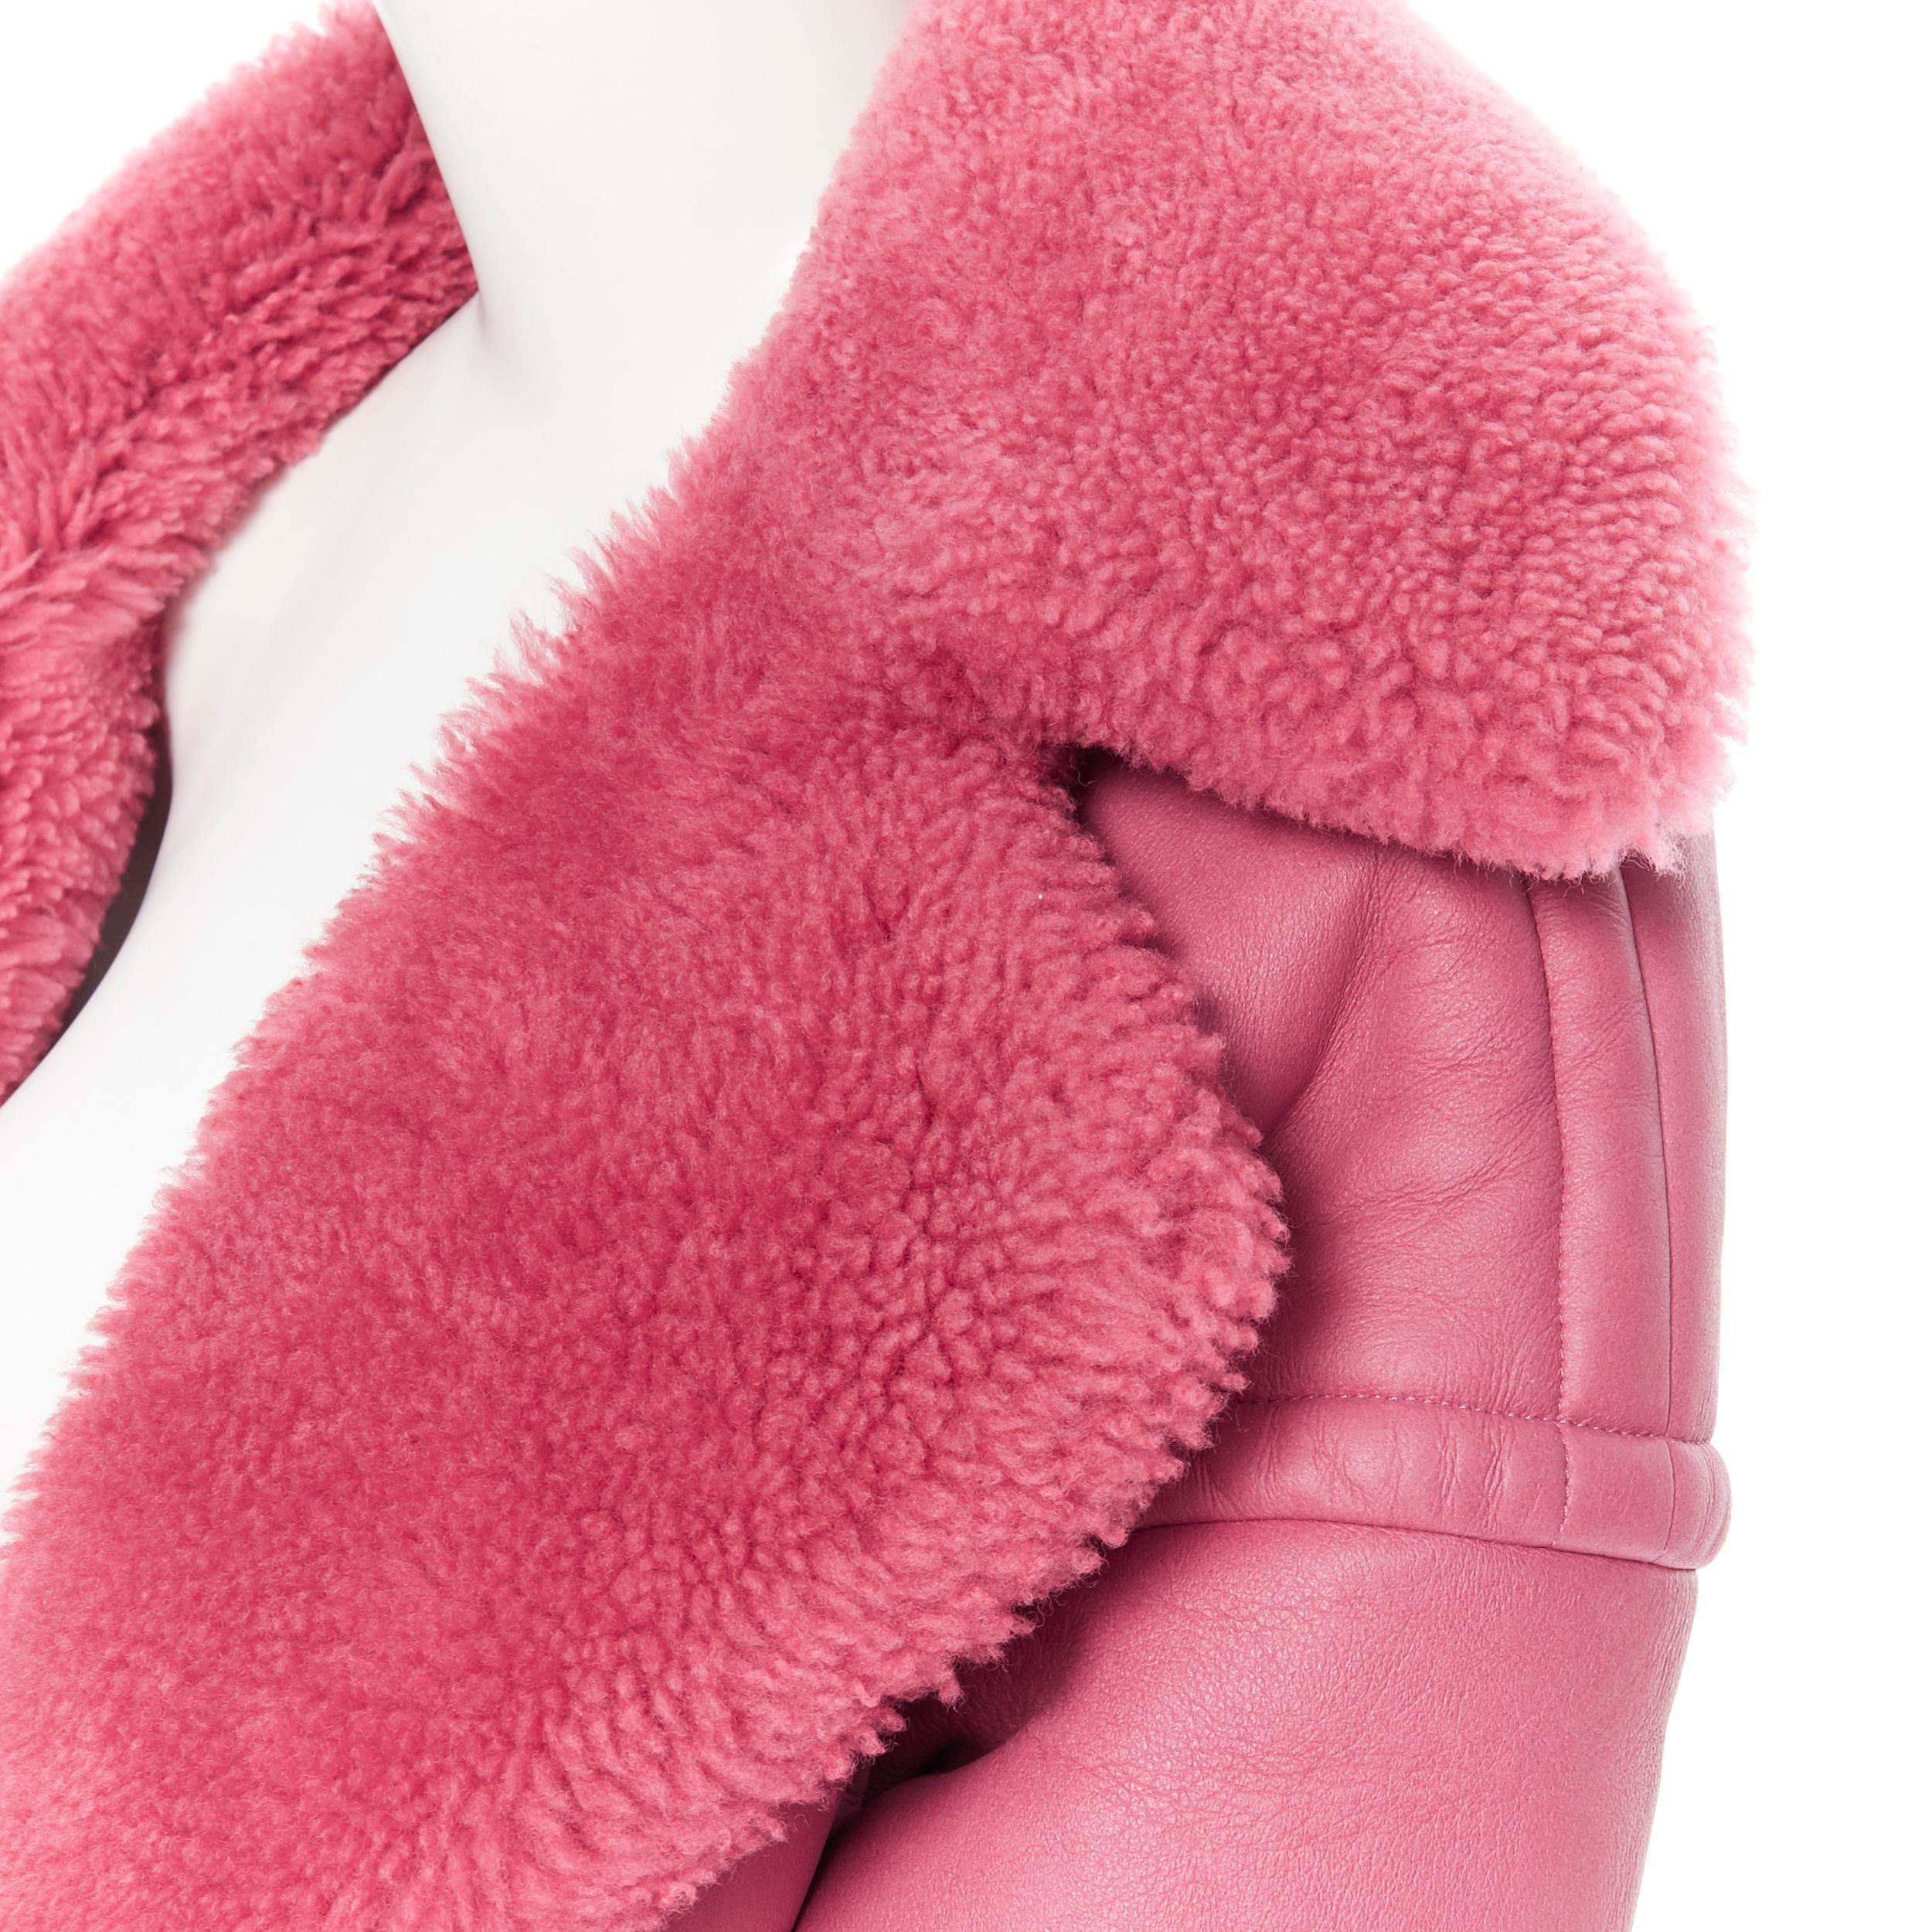 OSCAR DE LA RENTA reversible pink shearling leather oversized aviator coat
Brand: Oscar de la Renta
Collection: Pre-fall 2018
Model Name / Style: Shearling coat
Material: Fur
Color: Pink
Pattern: Solid
Lining material: Leather
Extra Detail: